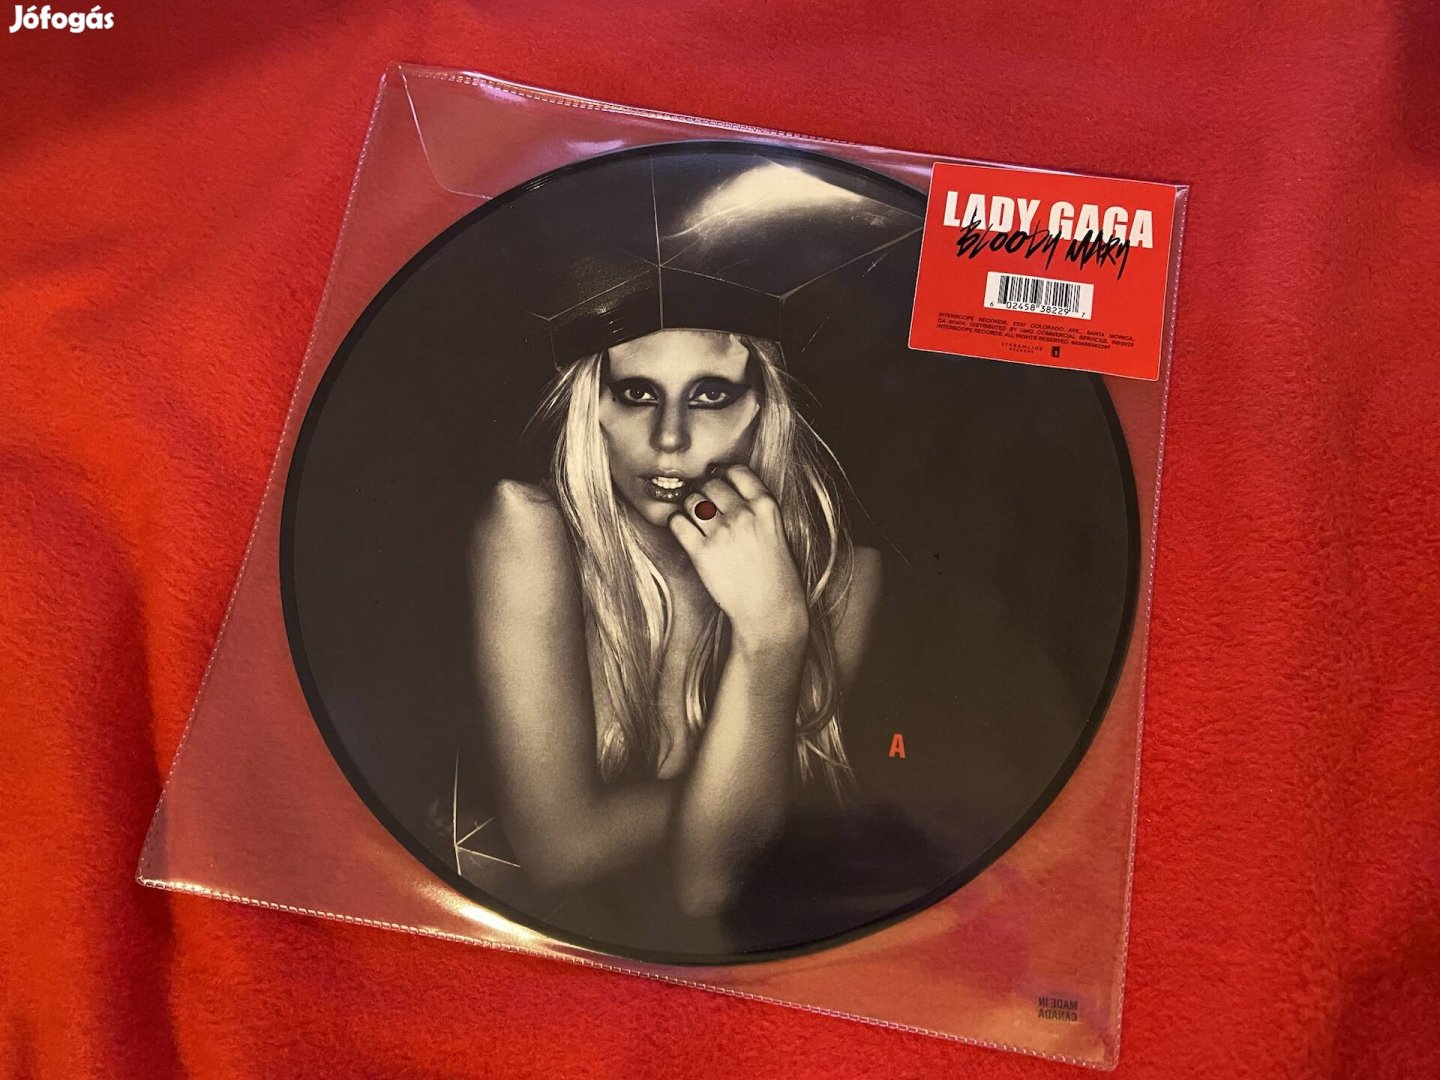 Lady Gaga - Bloody Mary bakelit vinyl 12" picture disc, US only